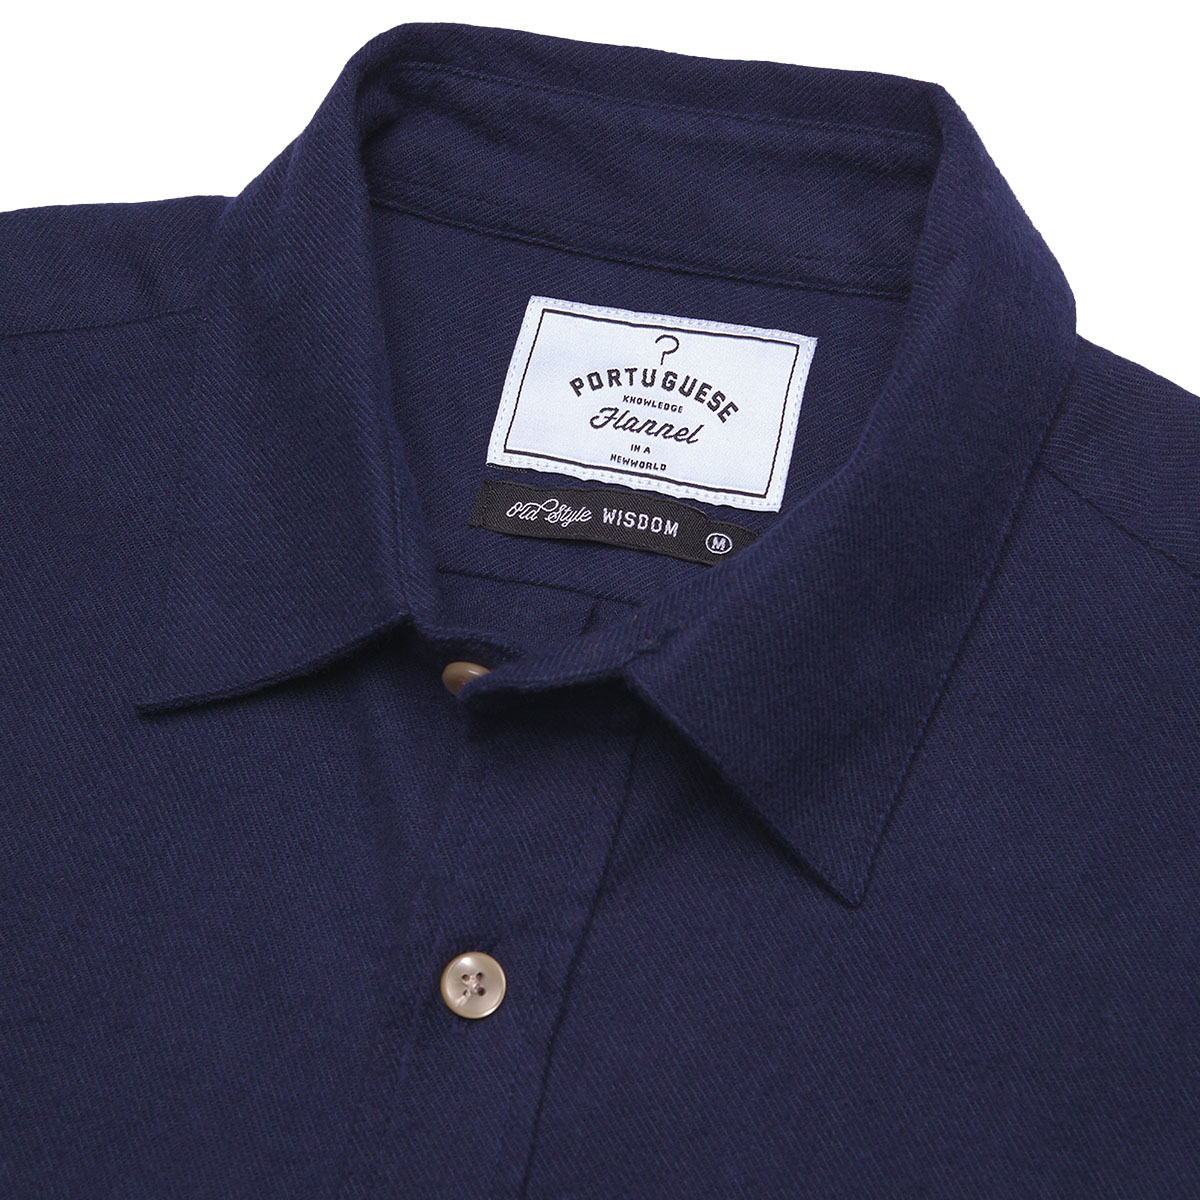 Portuguese Flannel Teca Cotton-Flannel Shirt Navy, made with the finest exclusive fabrics